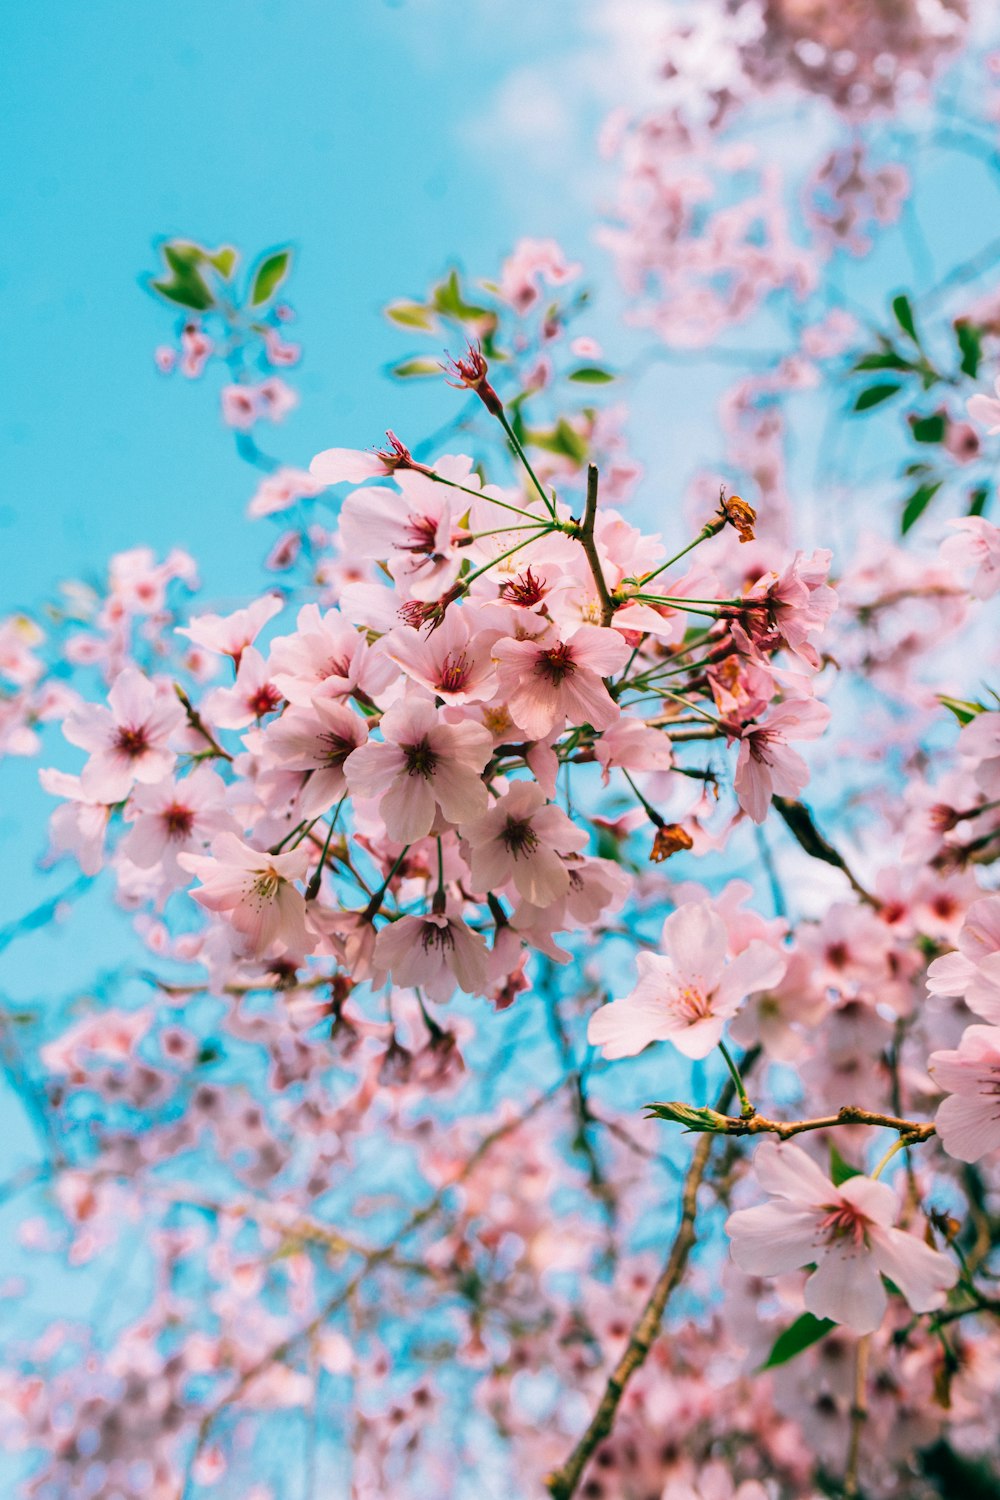 550+ Cherry Blossom Pictures | Download Free Images on Unsplash